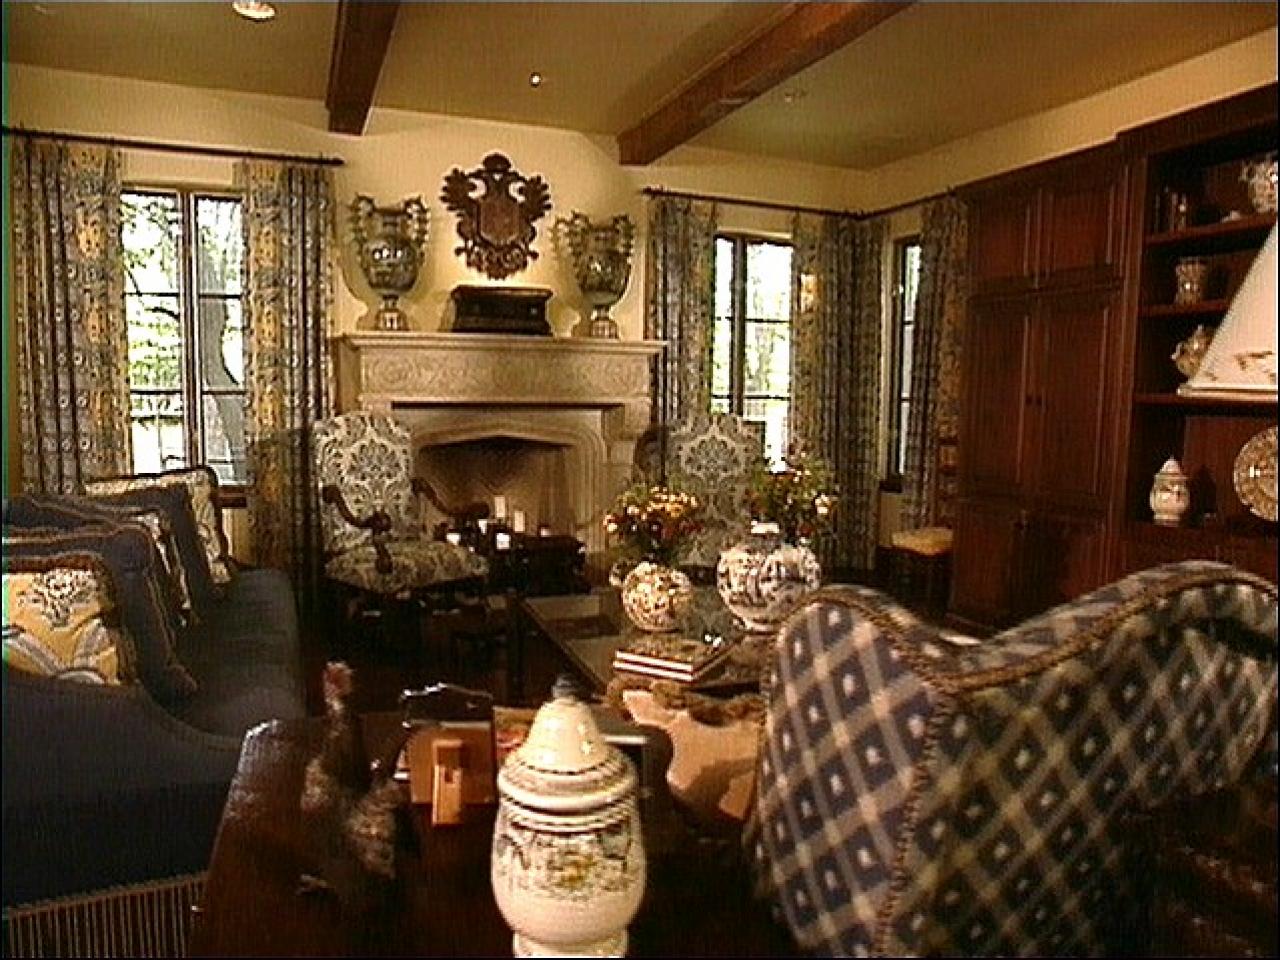 Exploring Old World Style With Hgtv Hgtv within Old World Home Decorating Ideas